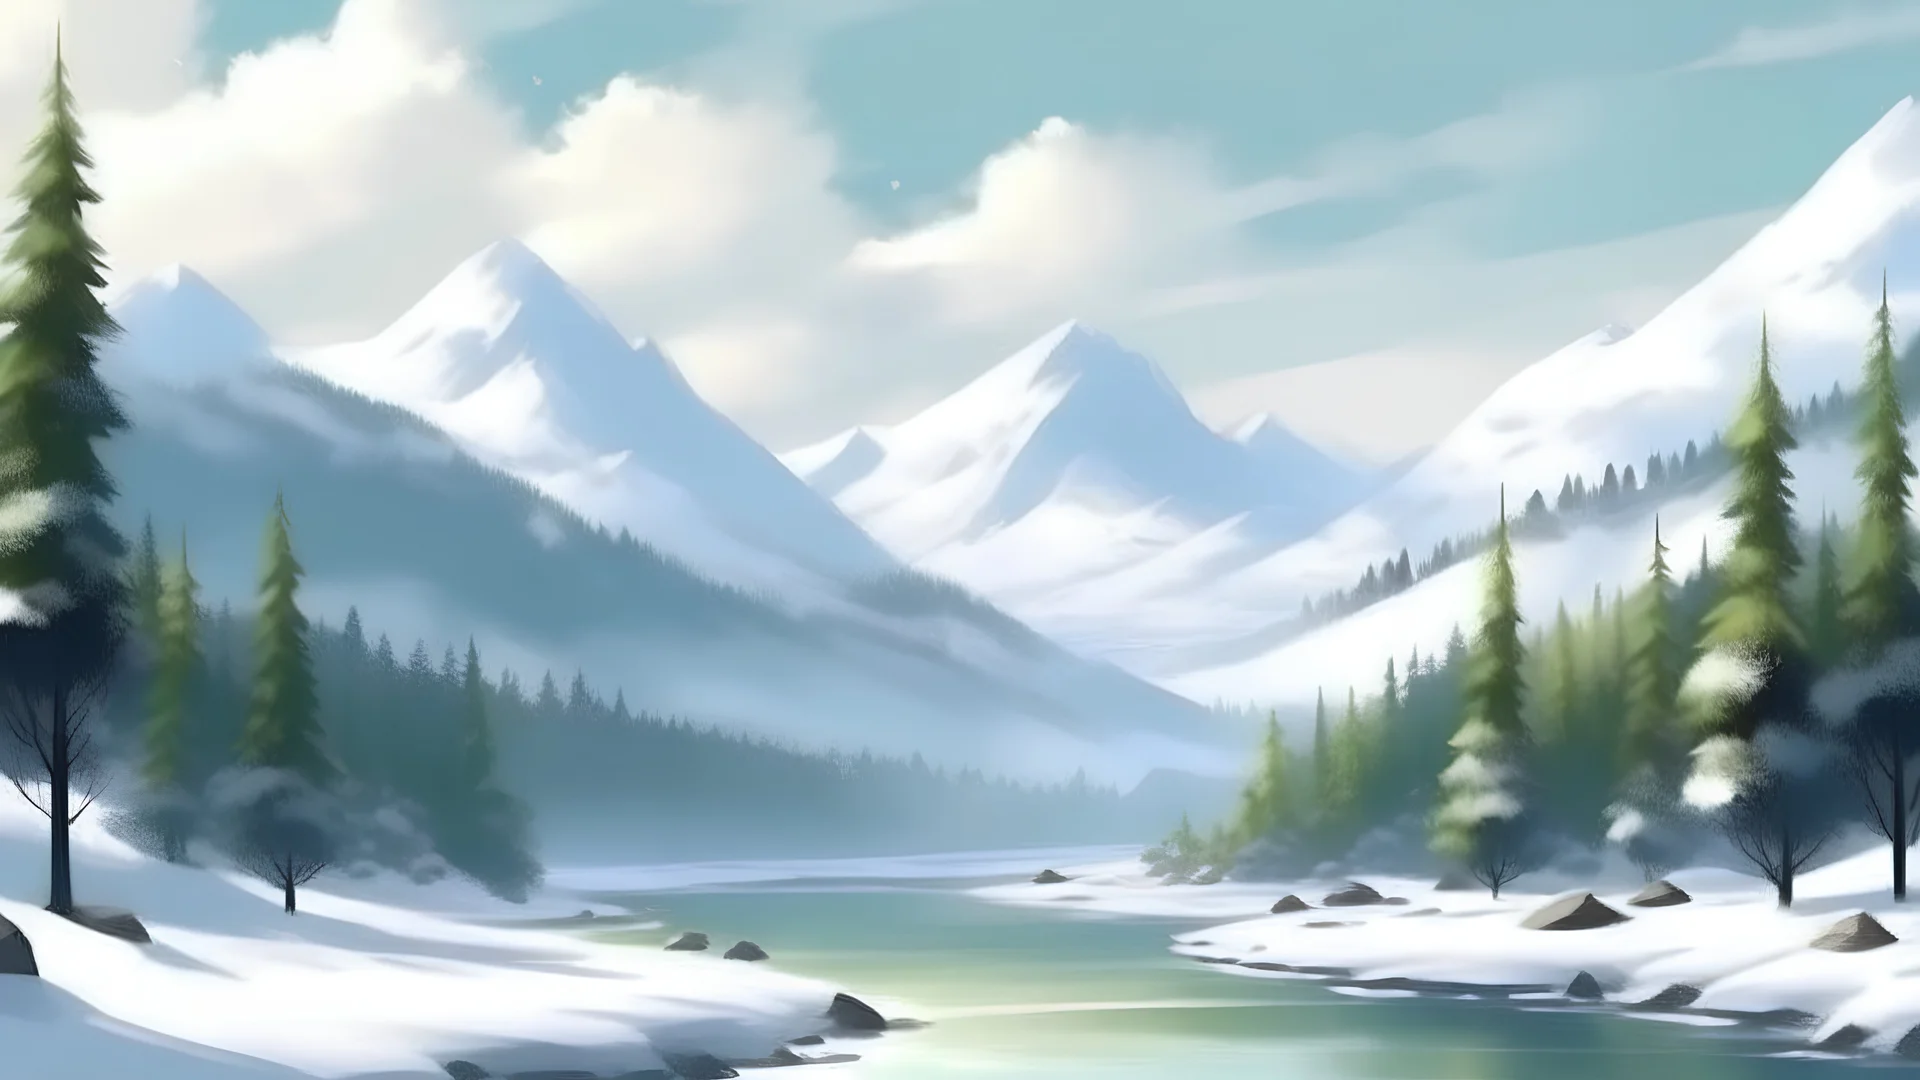 Mountainscape with snow, trees, river, clouds, hi def 4k in the style of Anil Nene